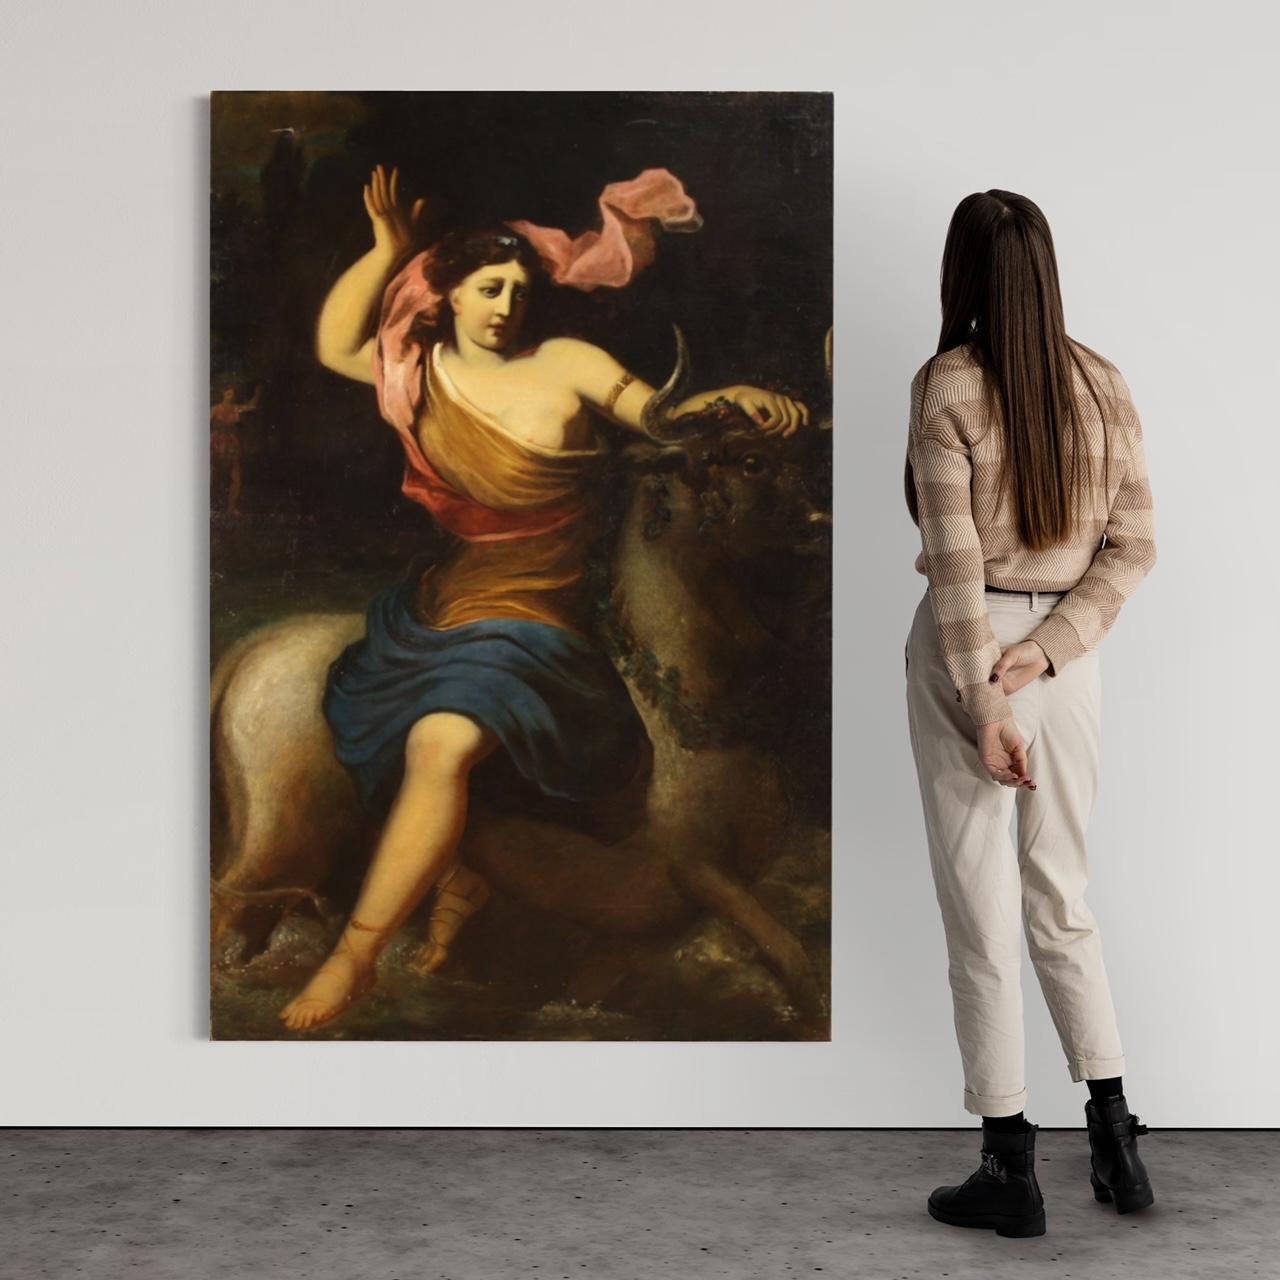 Antique Spanish painting from the second half of the 17th century. Oil on canvas artwork depicting a mythological subject, the Rape of Europa, of good pictorial quality. Legend has it that Zeus, in love with Europa, transformed himself into a